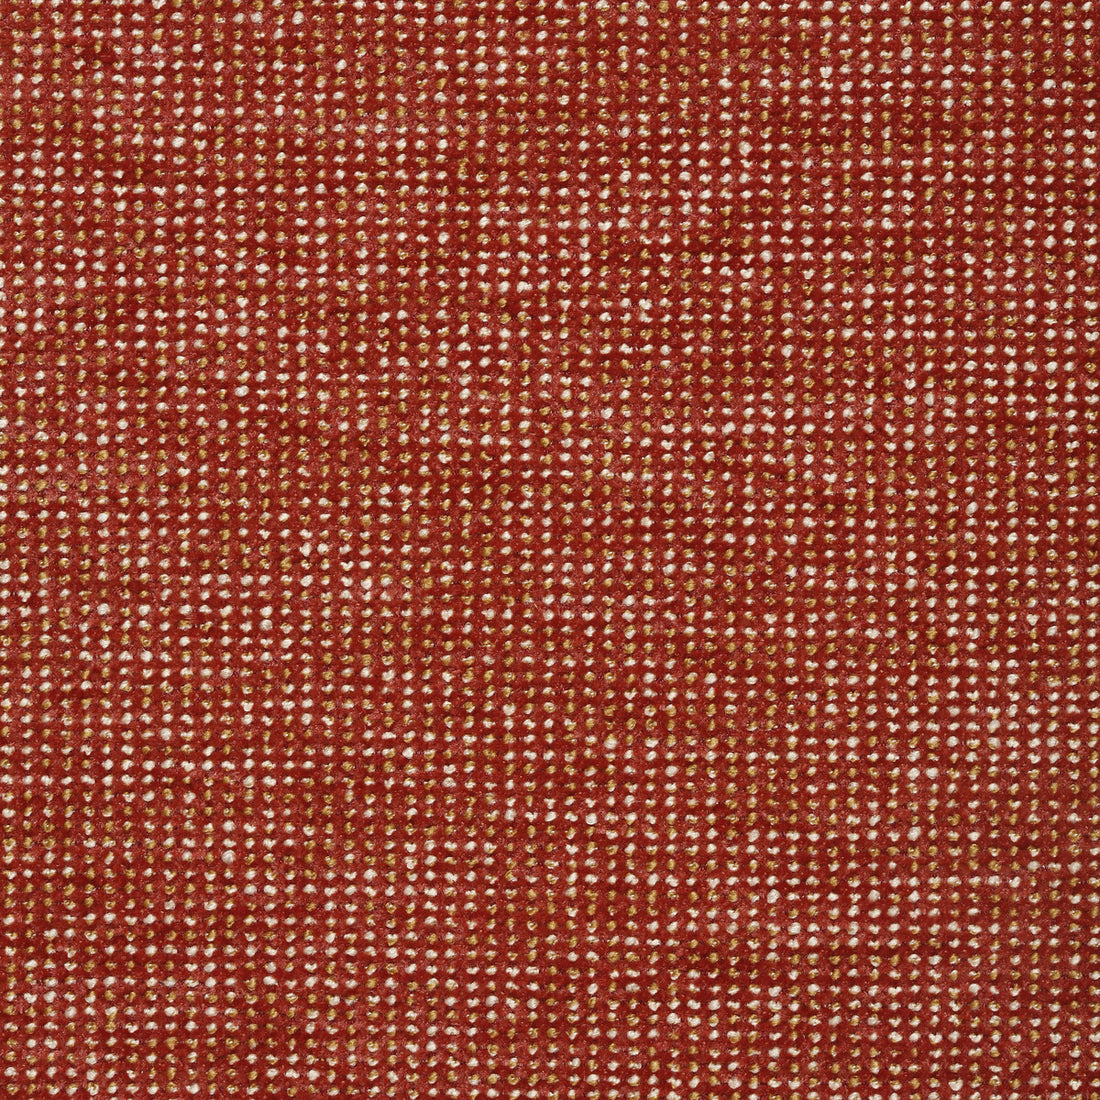 Kravet Contract fabric in 35116-24 color - pattern 35116.24.0 - by Kravet Contract in the Crypton Incase collection